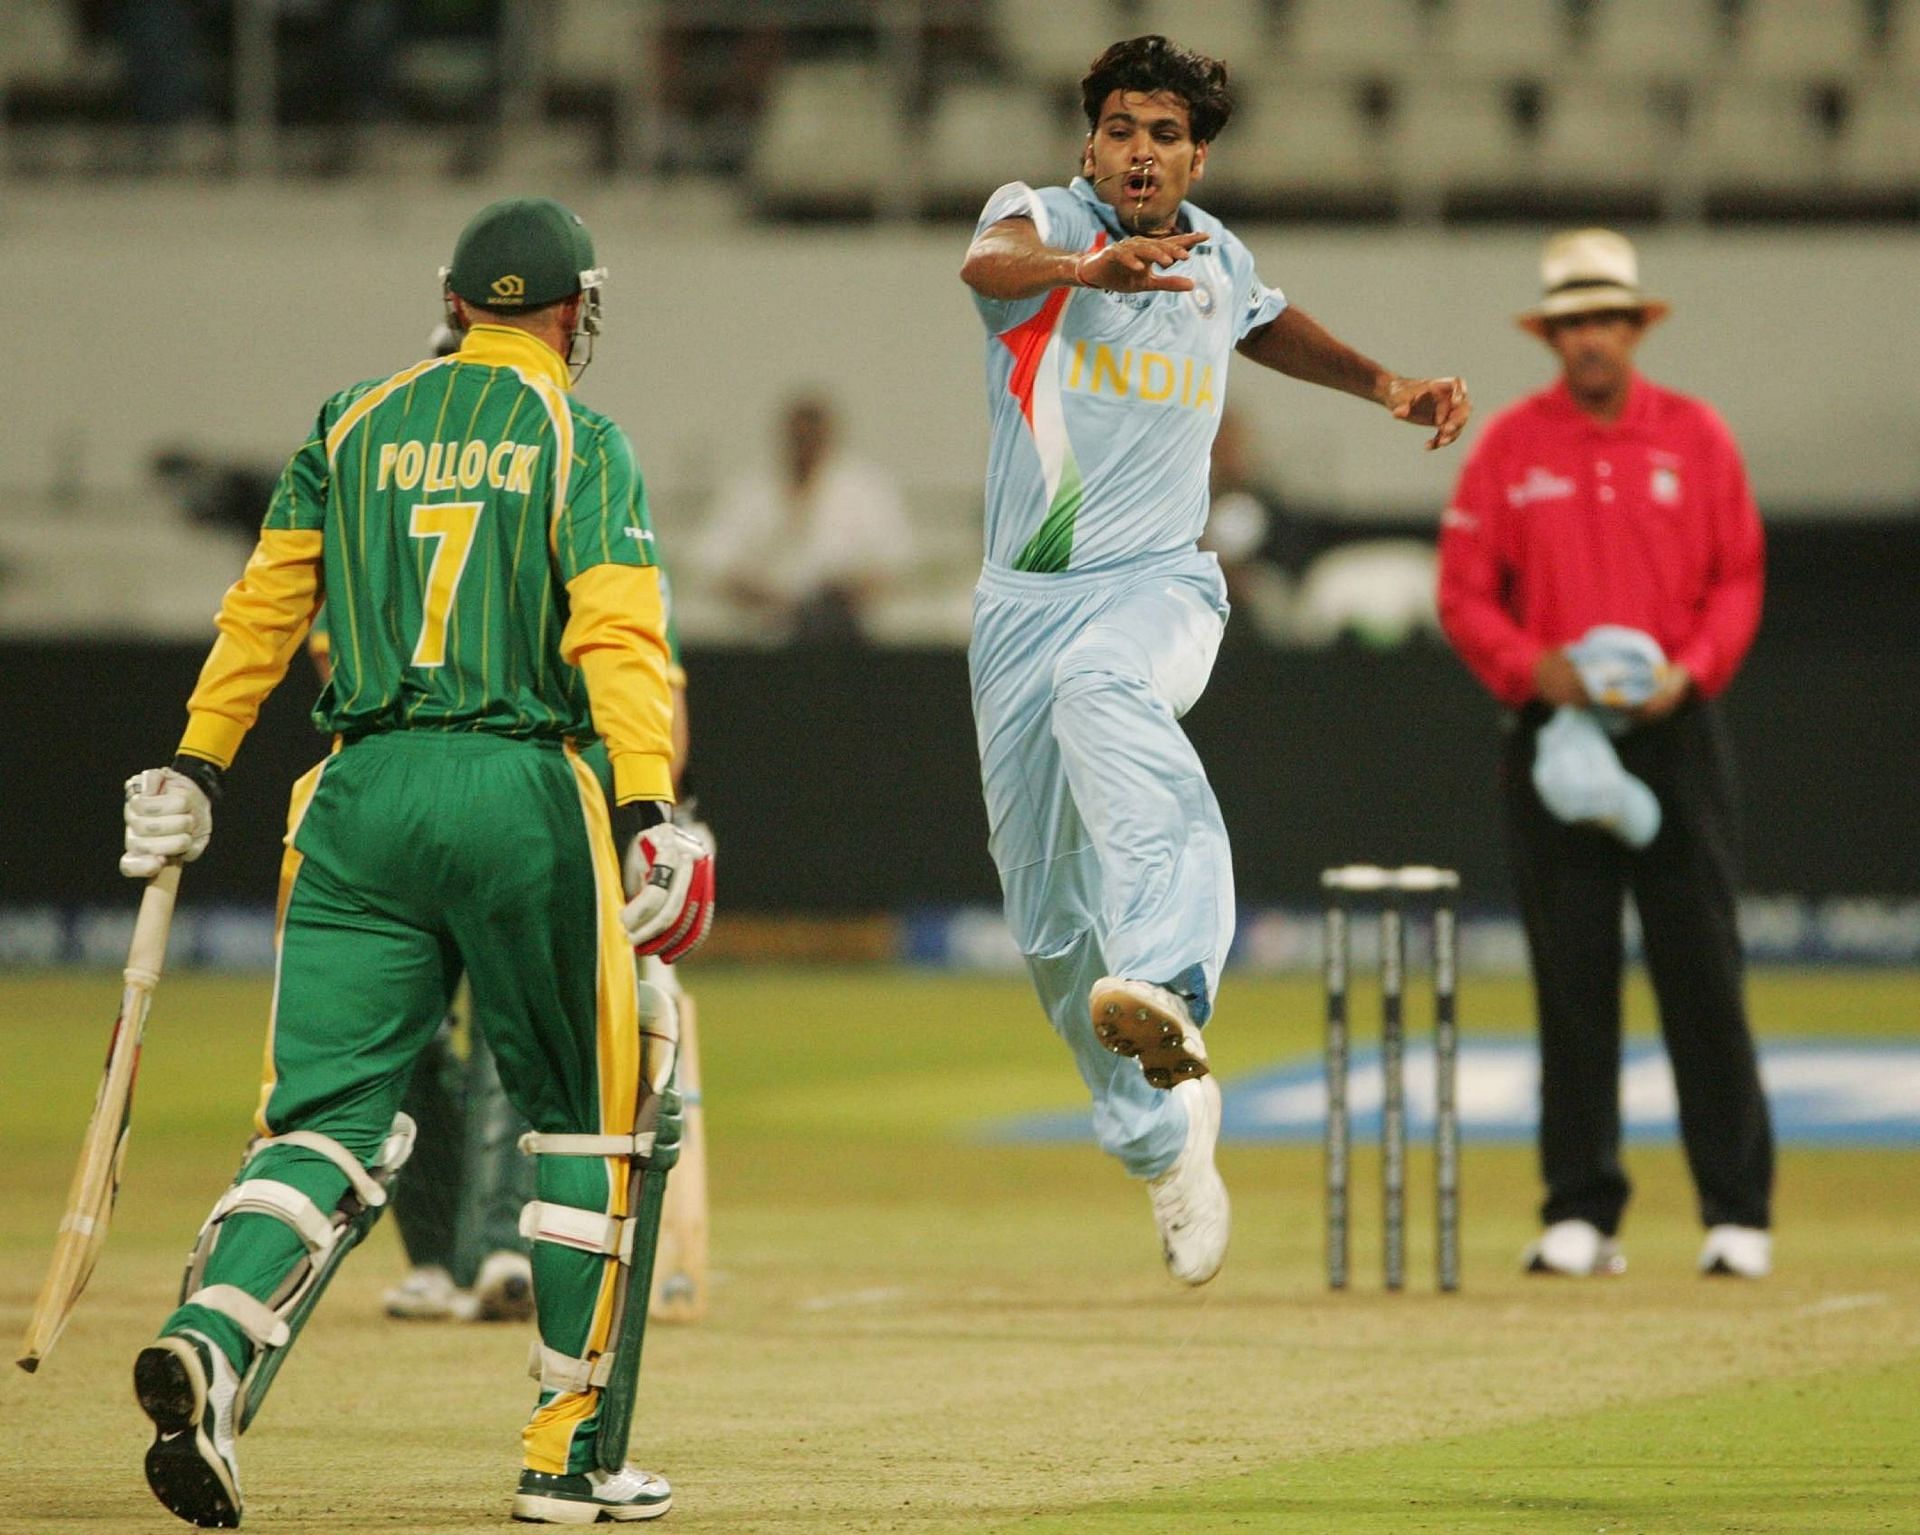 RP Singh of India celebrates after bowling Shaun Pollock in the 2007 T20 World Cup match. Pic: Getty Images